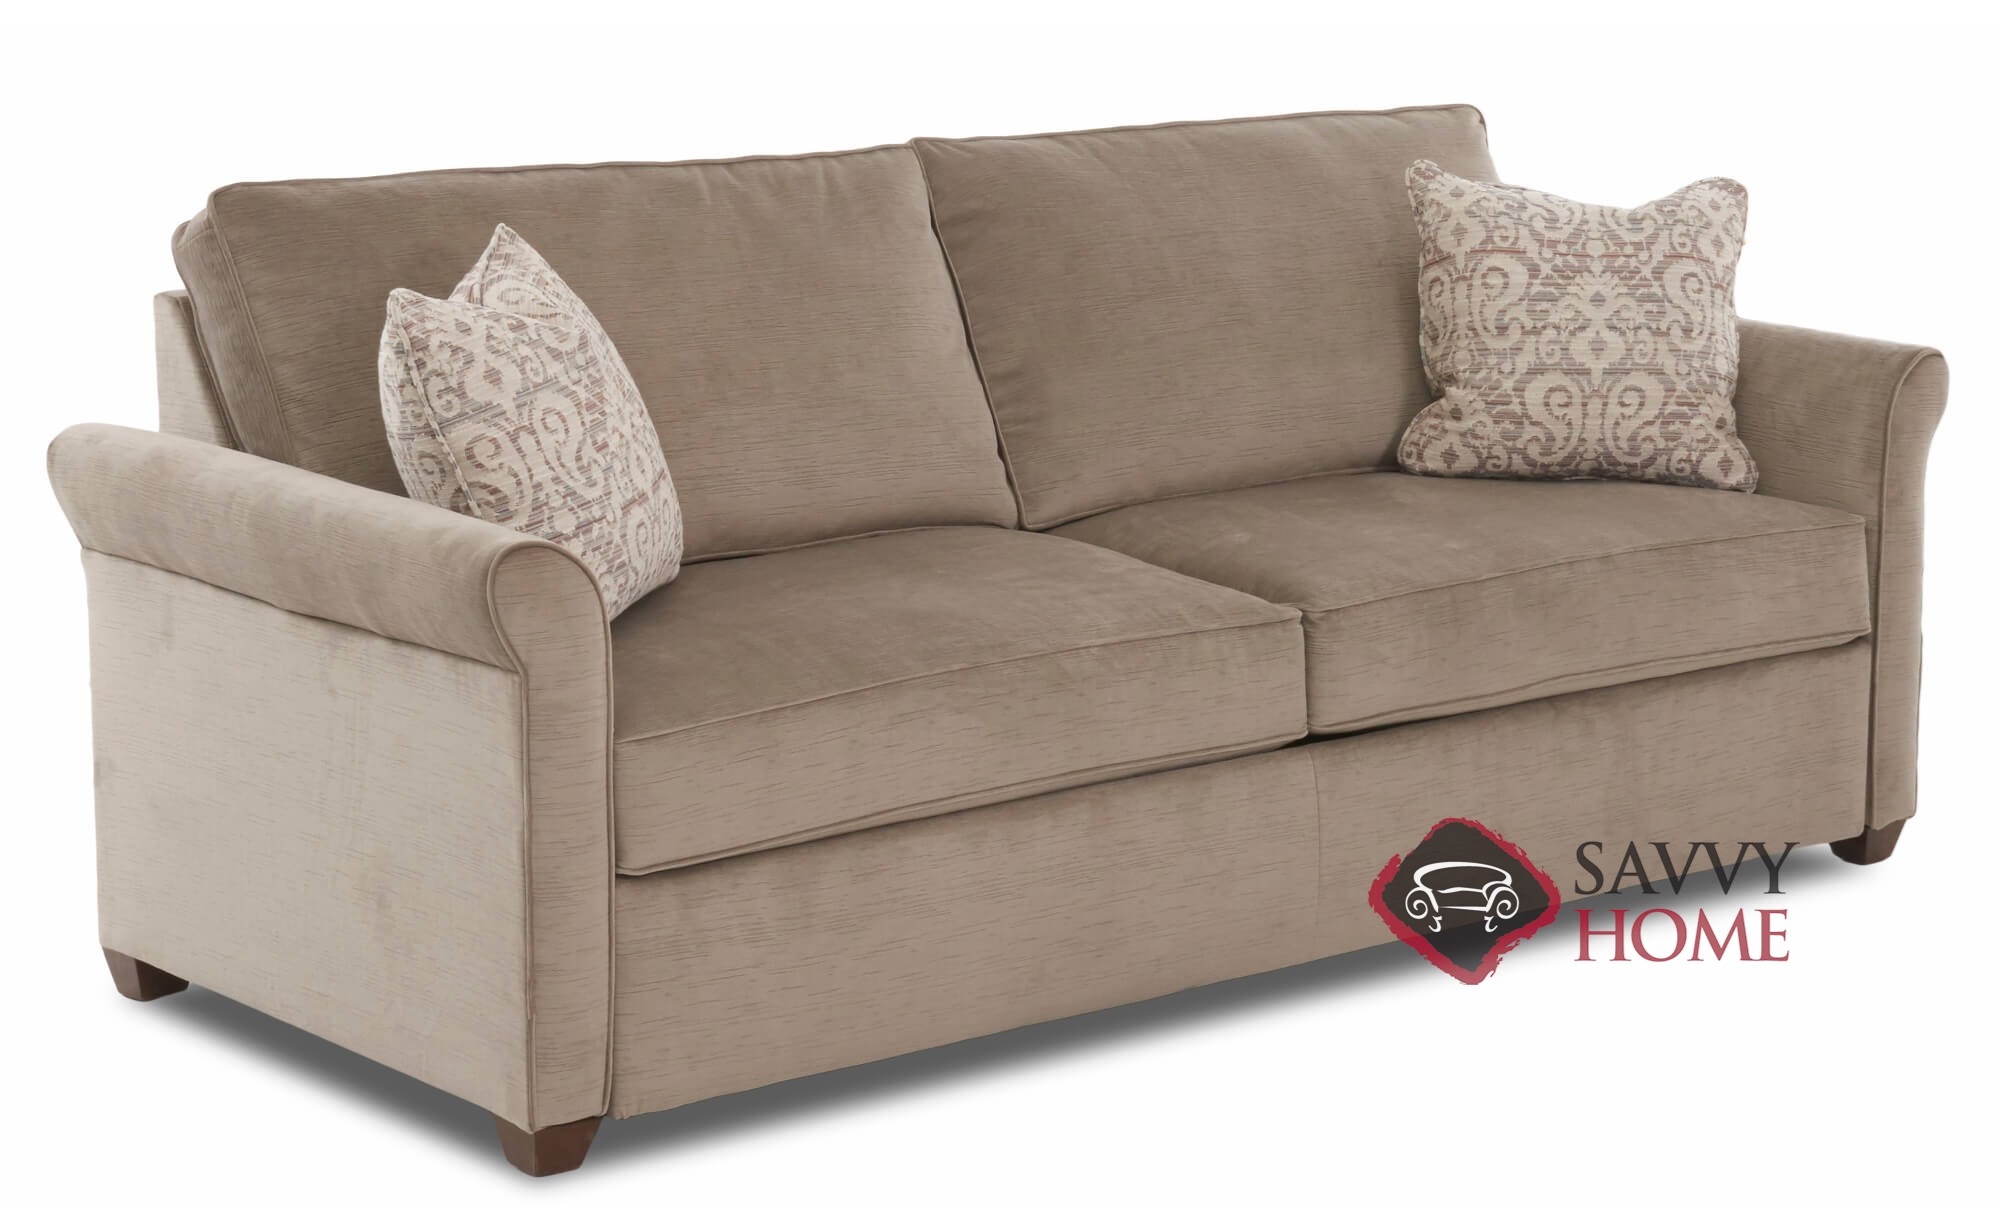 Fort Worth Fabric Sleeper Sofas Queen, Queen Size Sofa Sleeper Couch